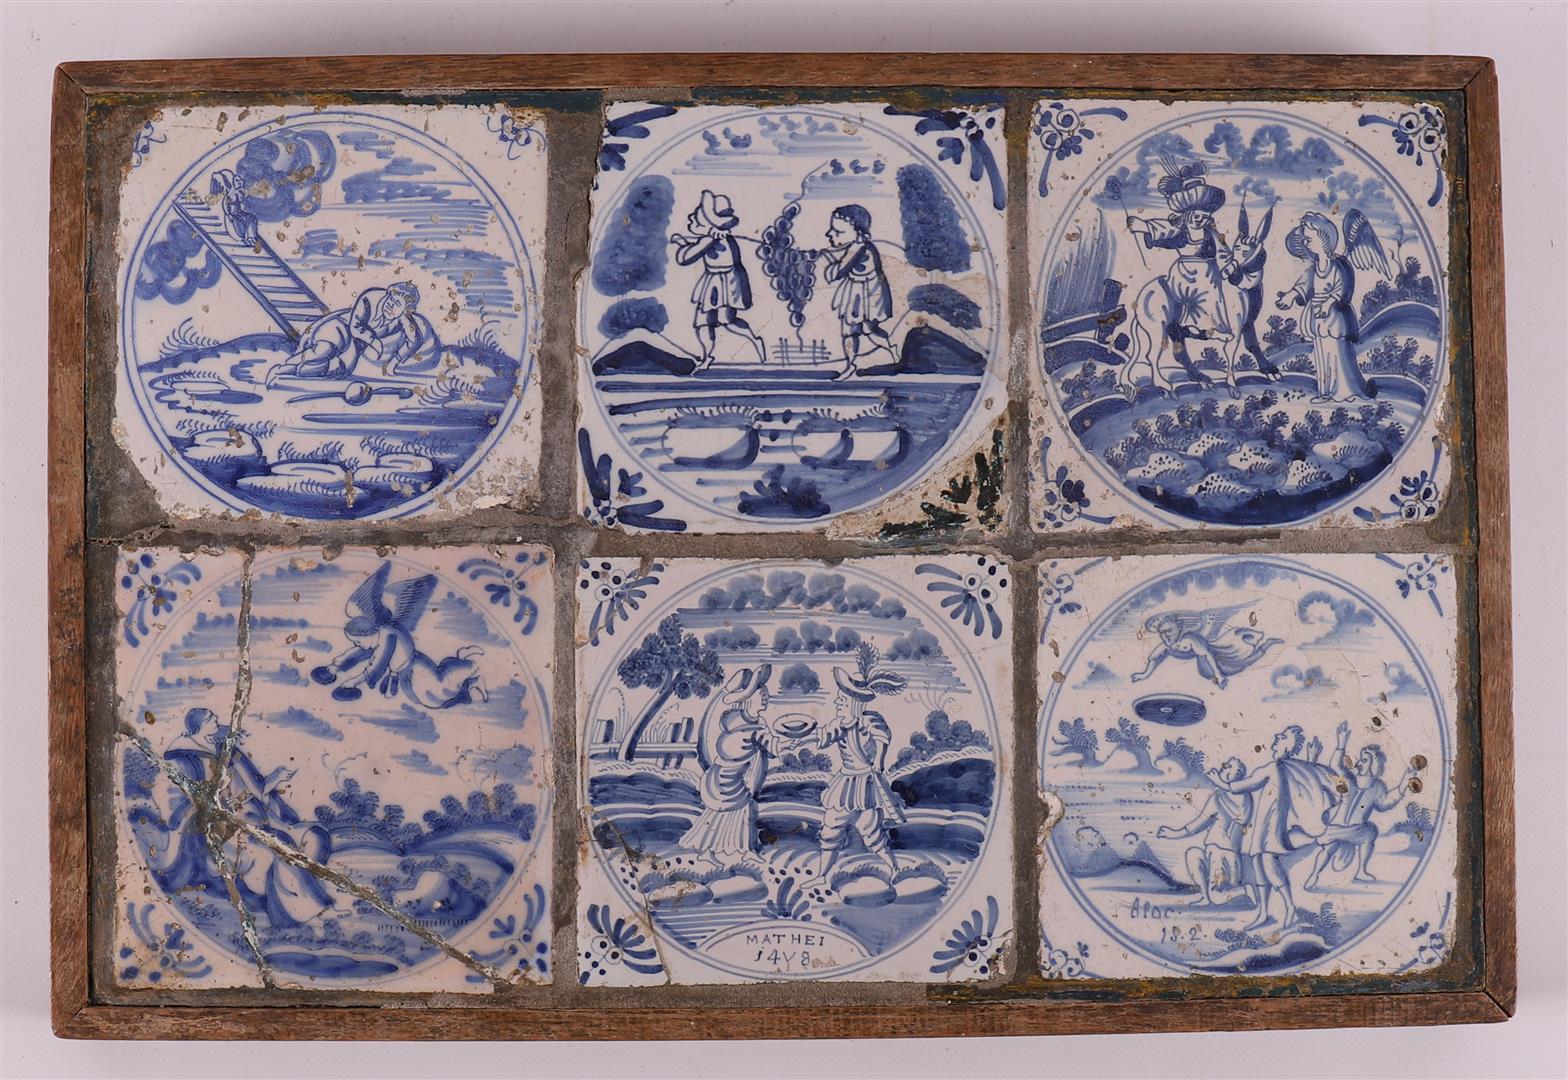 A twelve-step tile tableau with blue/white religious tiles, 18th century. - Image 3 of 3